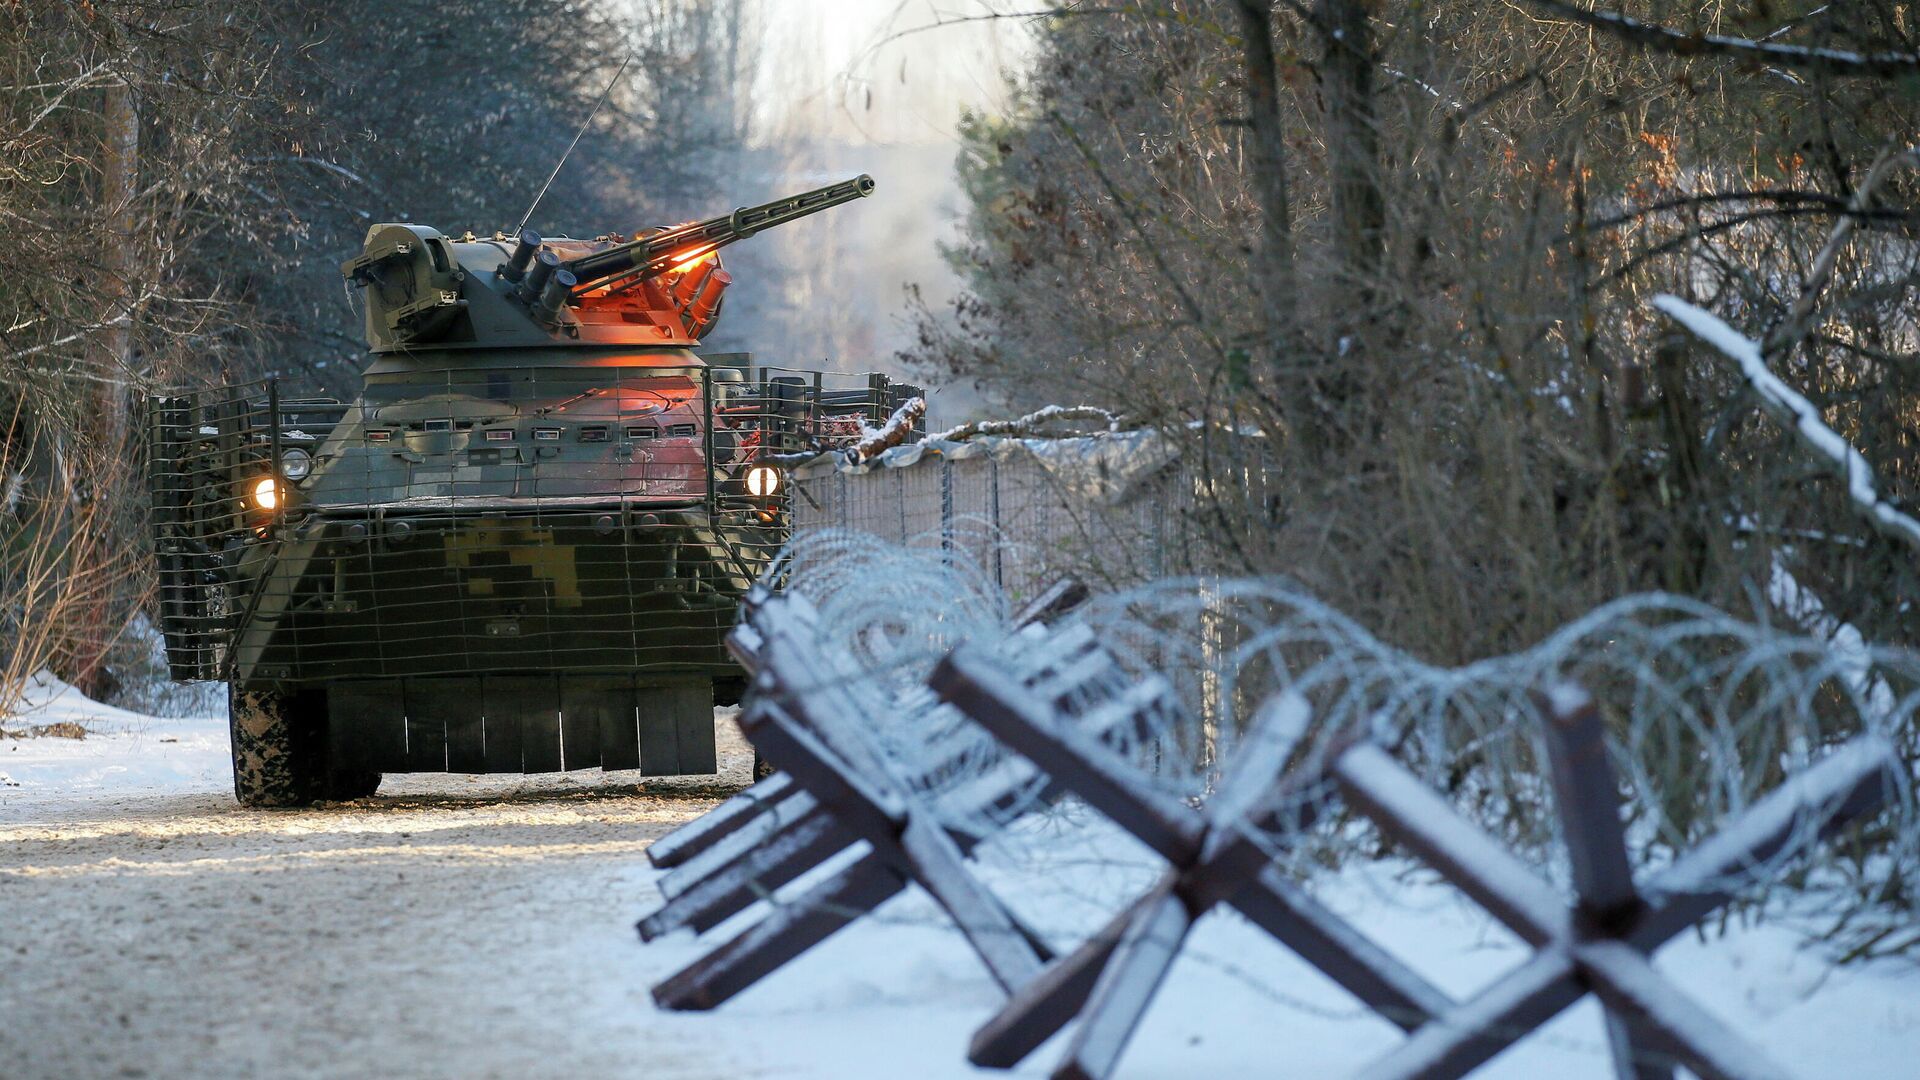 An armoured personnel carrier is seen during tactical exercises, which are conducted by the Ukrainian National Guard, Armed Forces, special operations units and simulate a crisis situation in an urban settlement, in the abandoned city of Pripyat near the Chernobyl Nuclear Power Plant, Ukraine February 4, 2022. - Sputnik International, 1920, 13.02.2022